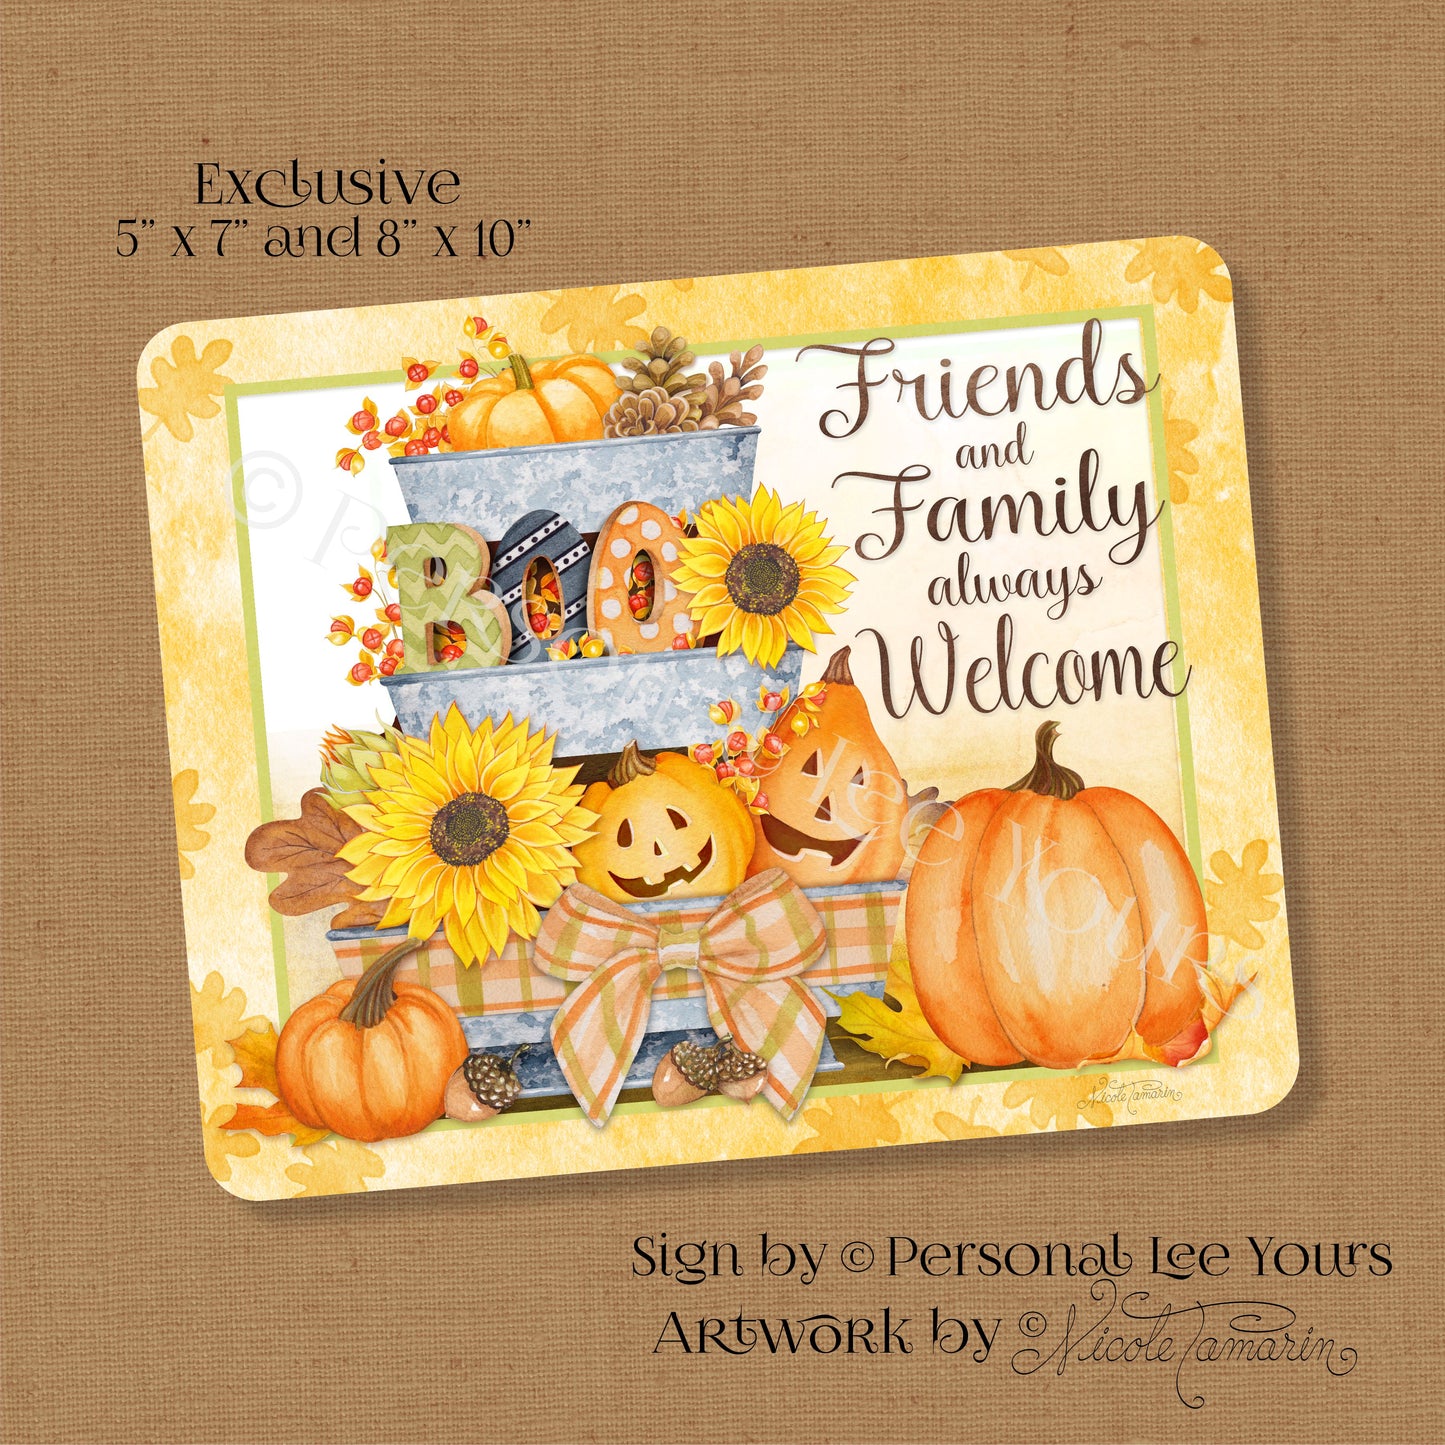 Nicole Tamarin Exclusive Sign * Friends And Family Always Welcome * 2 Sizes * Lightweight Metal